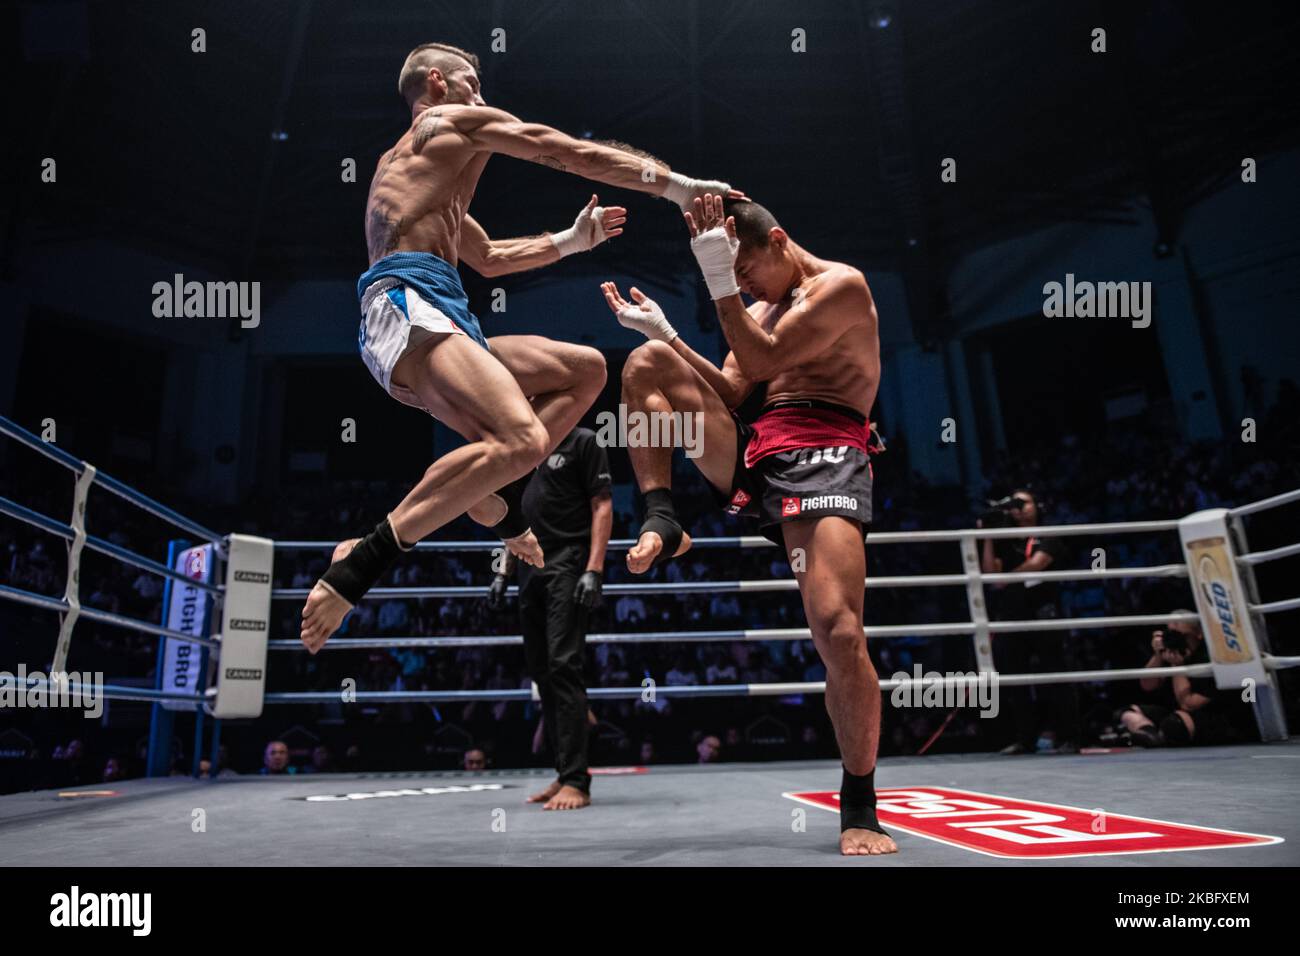 Saw Kaung Htet of Myanmar (L) fights against Samuel Toscano of Italy (R) in their welterweight bout during World Lethwei Championship in Yangon, Myanmar on January 31, 2020. (Photo by Shwe Paw Mya Tin/NurPhoto) Stock Photo